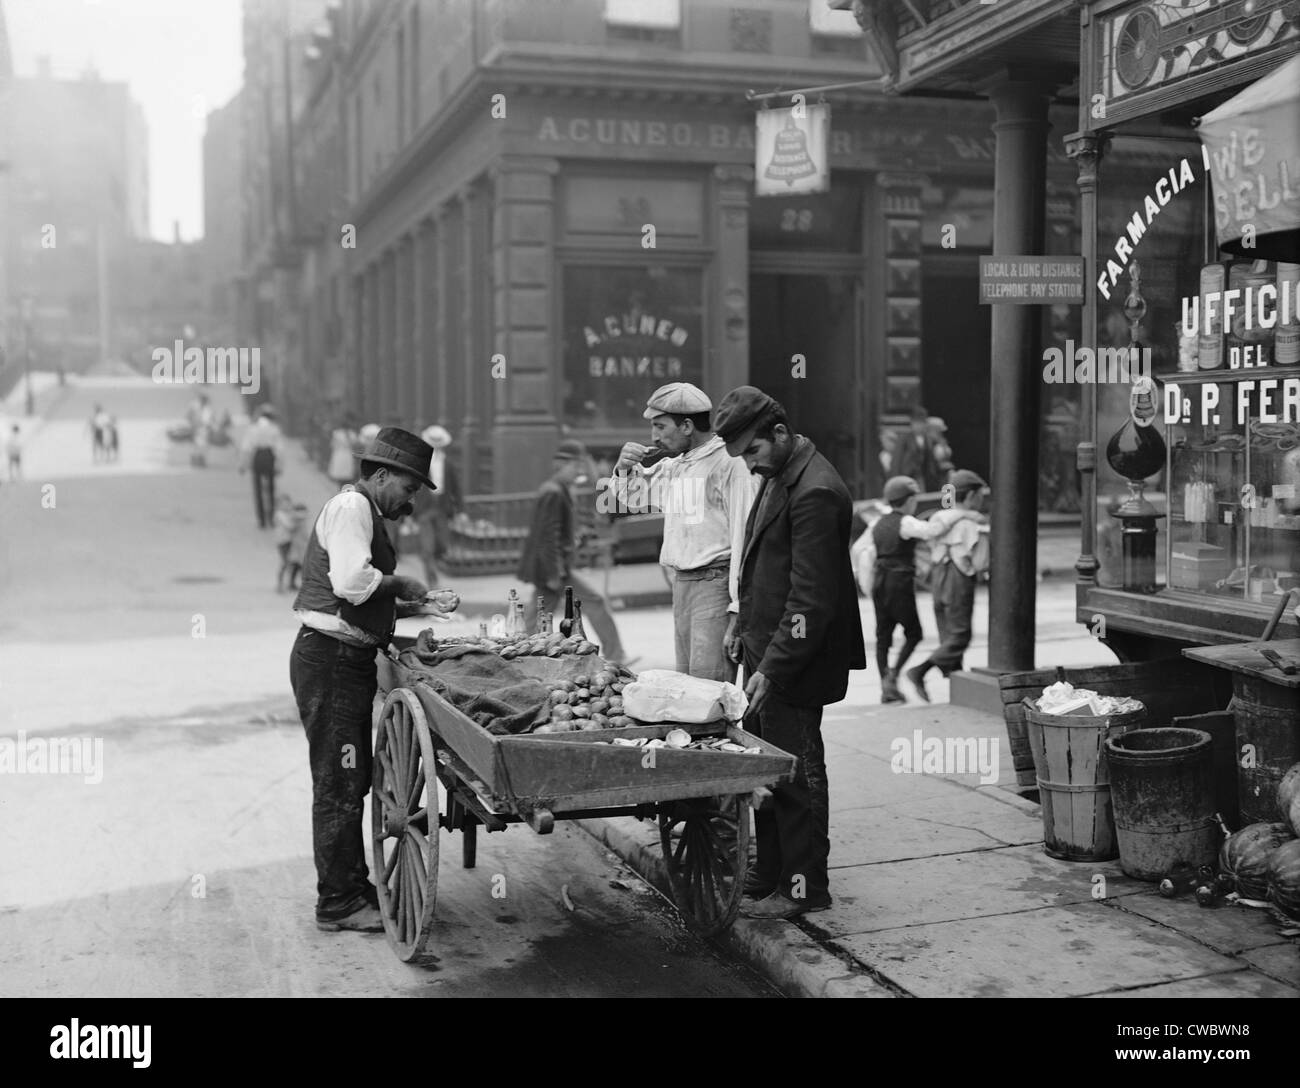 Men eating fresh clams from a pushcart peddler in the Italian neighborhood of Mulberry Bend in New York City. Ca. 1900 Stock Photo